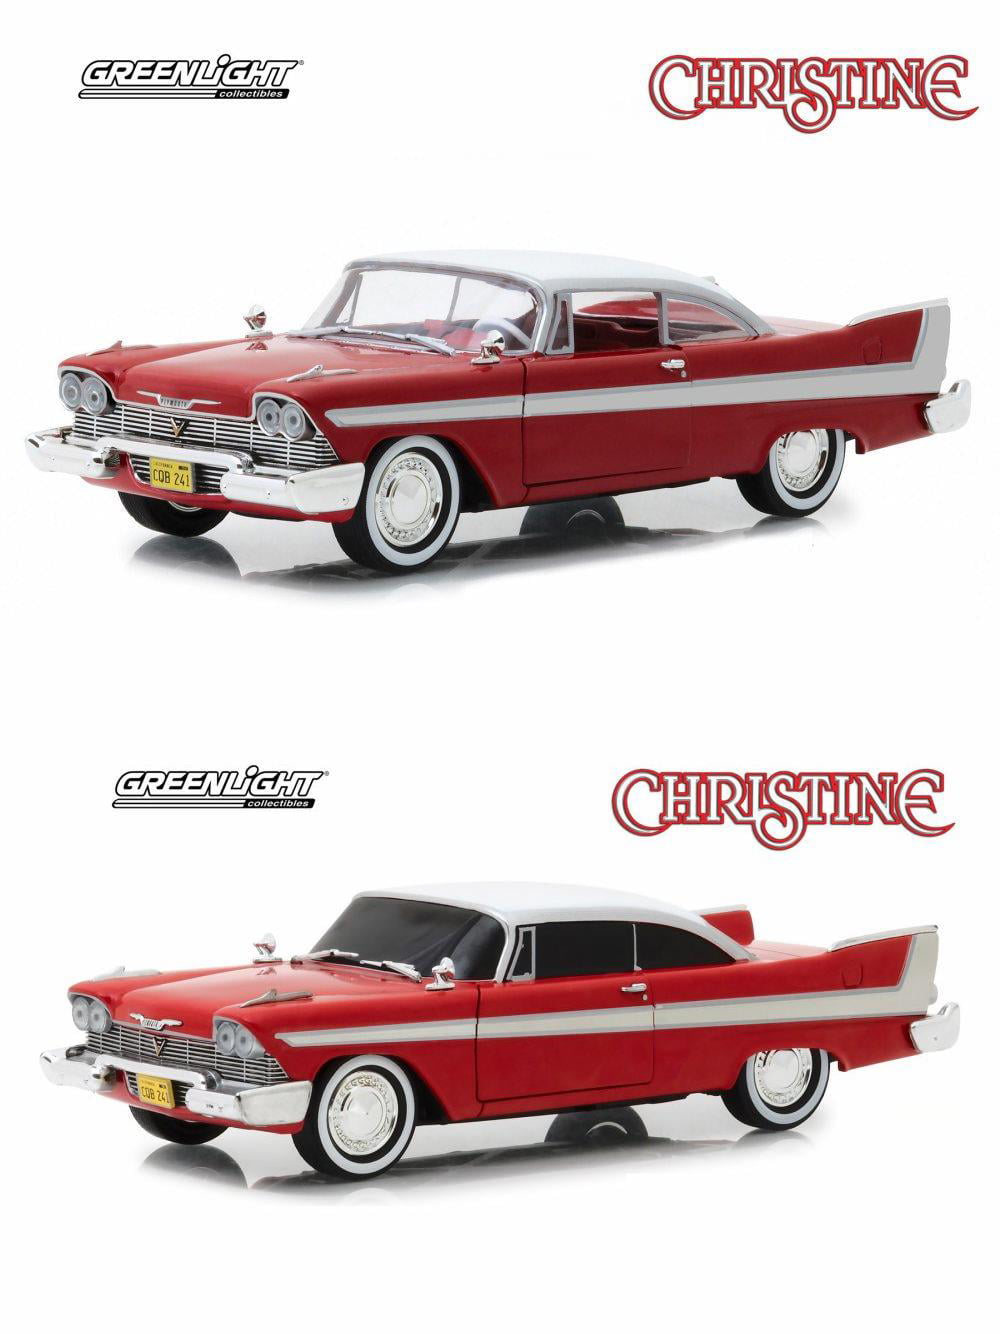 Christine Diecast Toy Car Package - Two 1/24 Scale Diecast ...